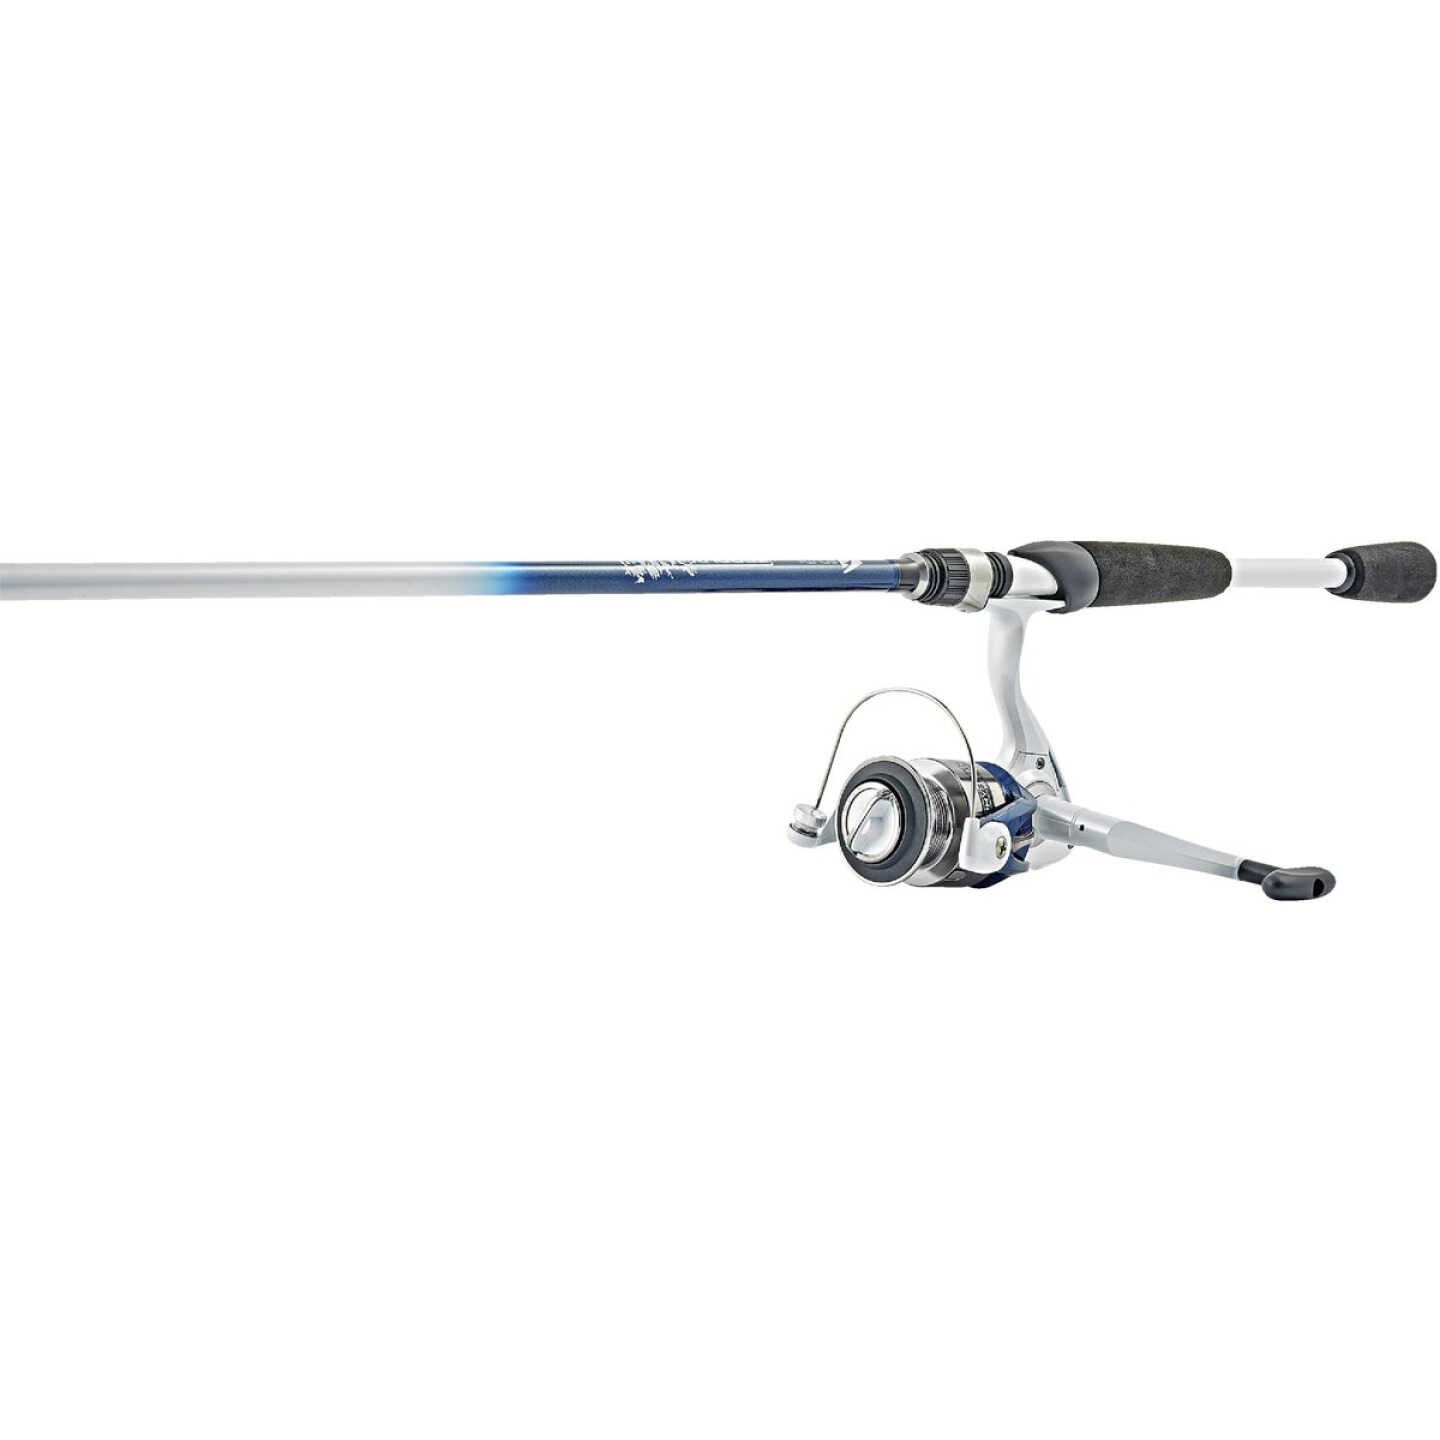 7Ft Fishing Rod and Reel Including Fishing All Type of Fishing Combo Set